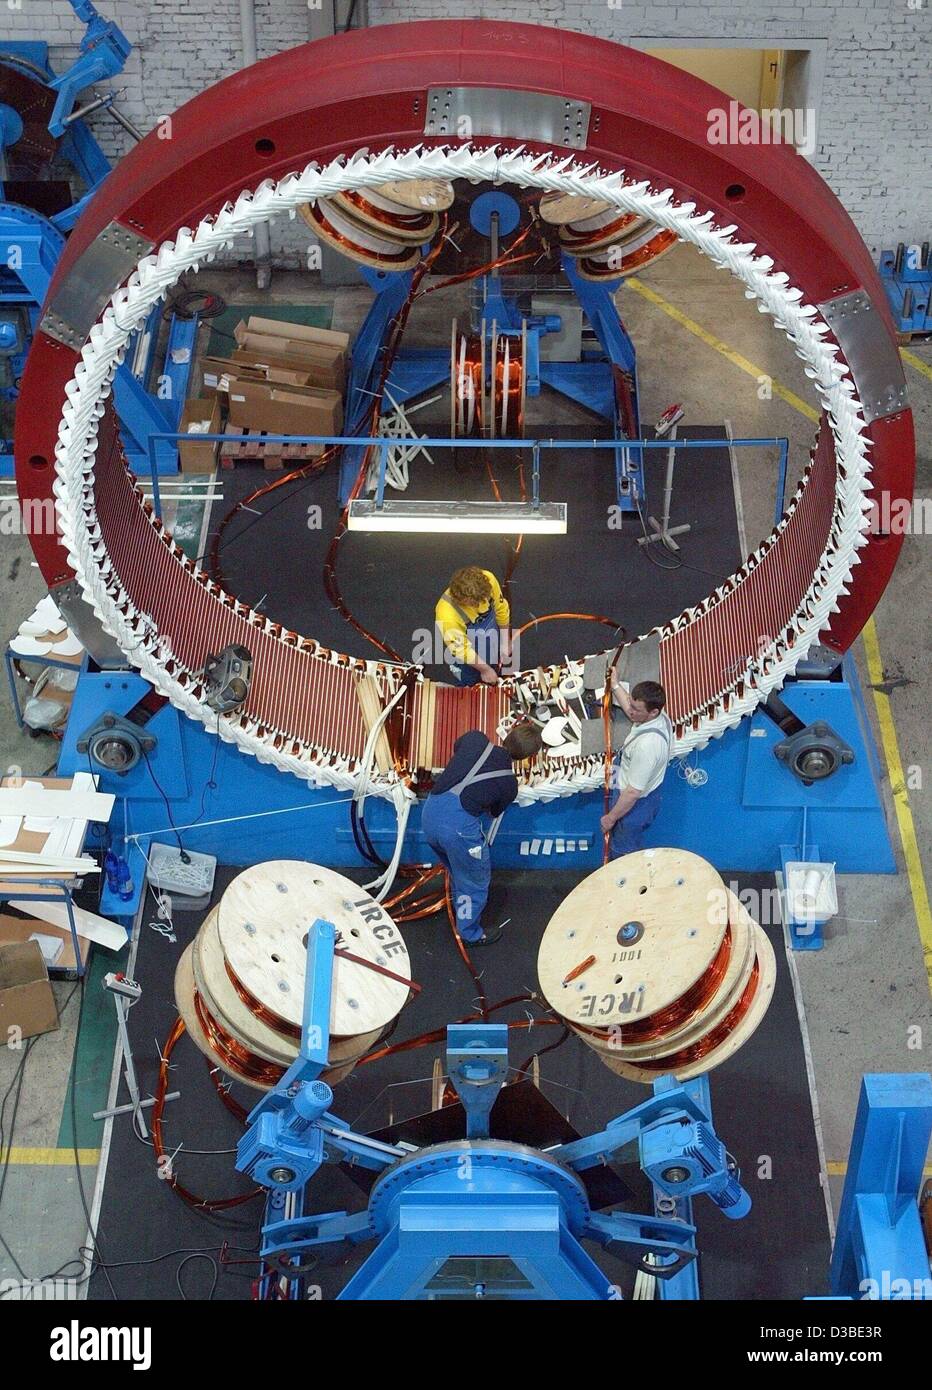 (dpa) - Enercon employees are working on the stator of a wind generator, Magdeburg, 22 January 2003. Enercon is considered the market leader in the production of wind power plants. Stock Photo